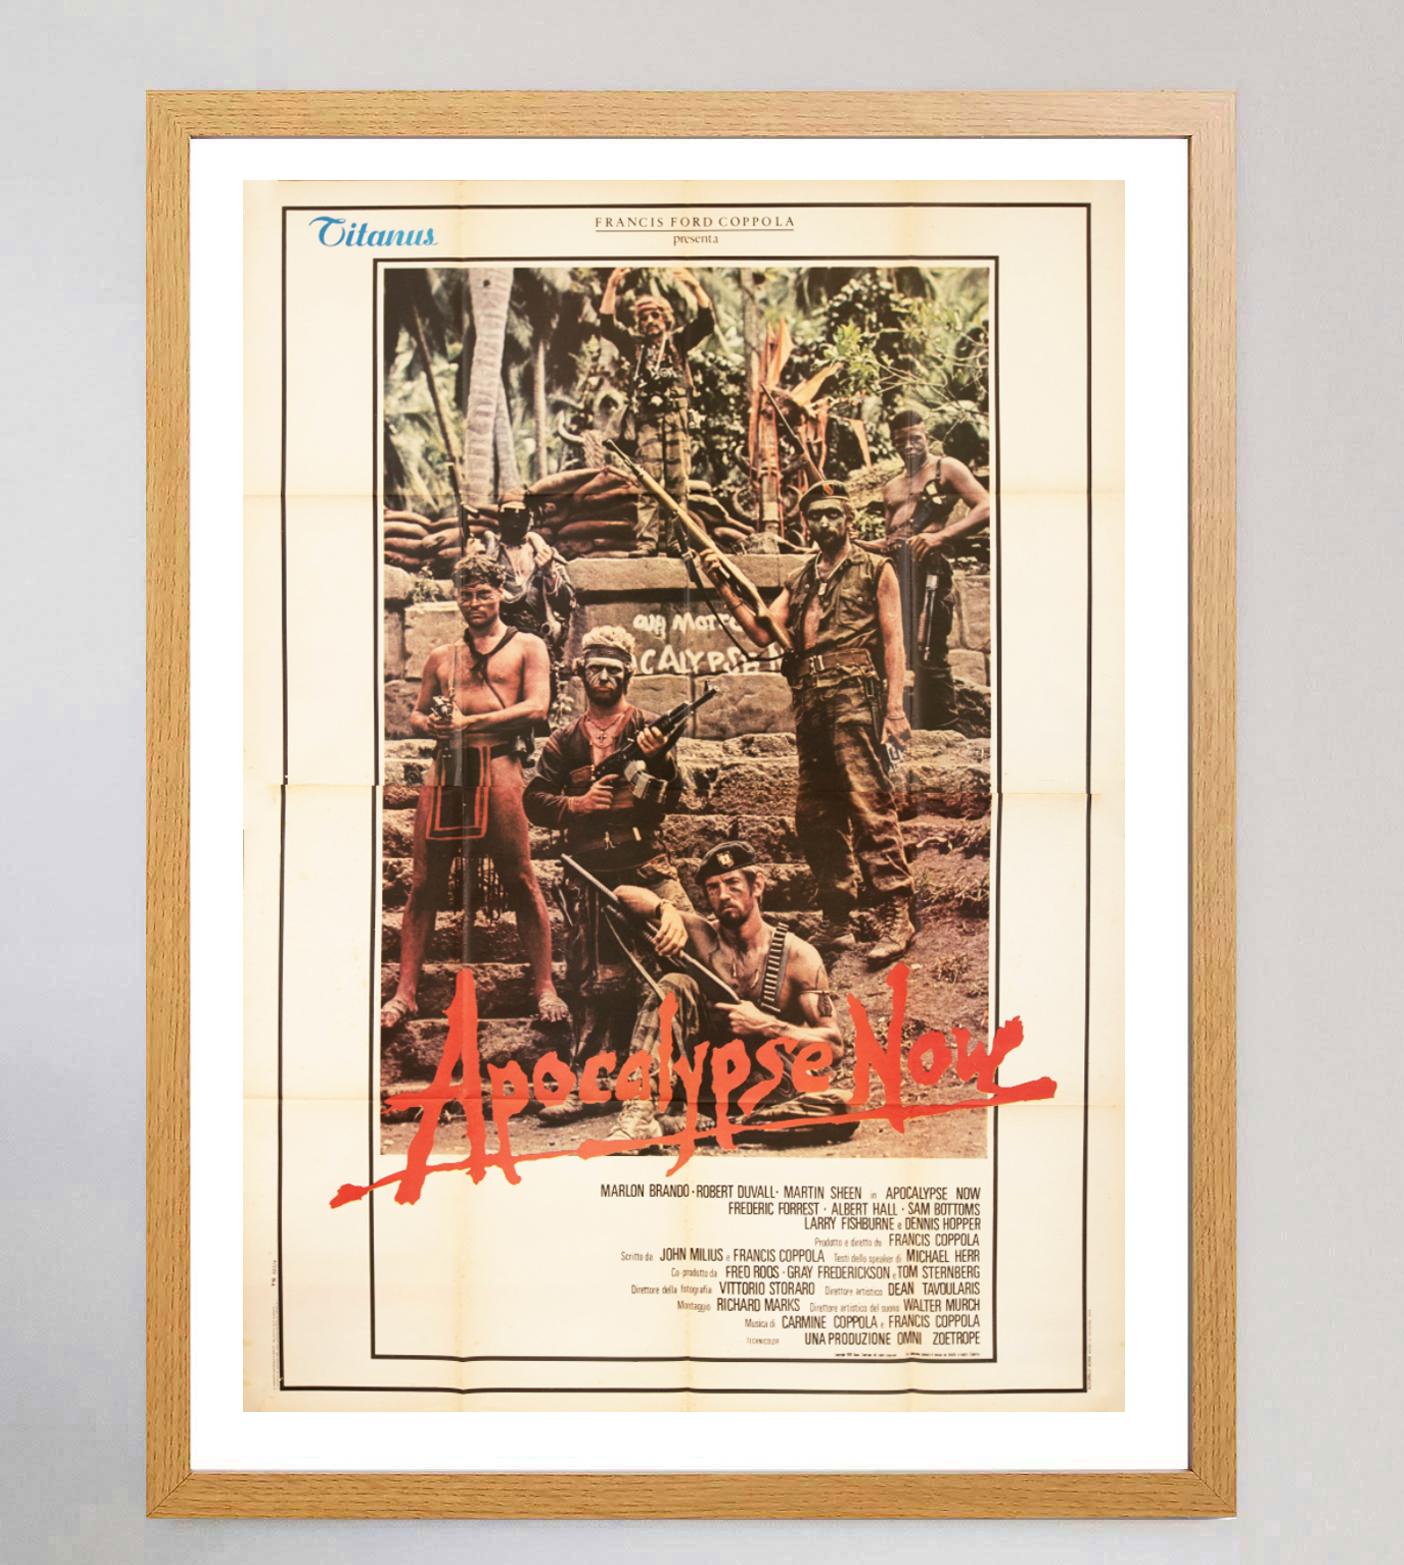 1979 Apocalypse Now (Italian) Original Vintage Poster In Good Condition For Sale In Winchester, GB